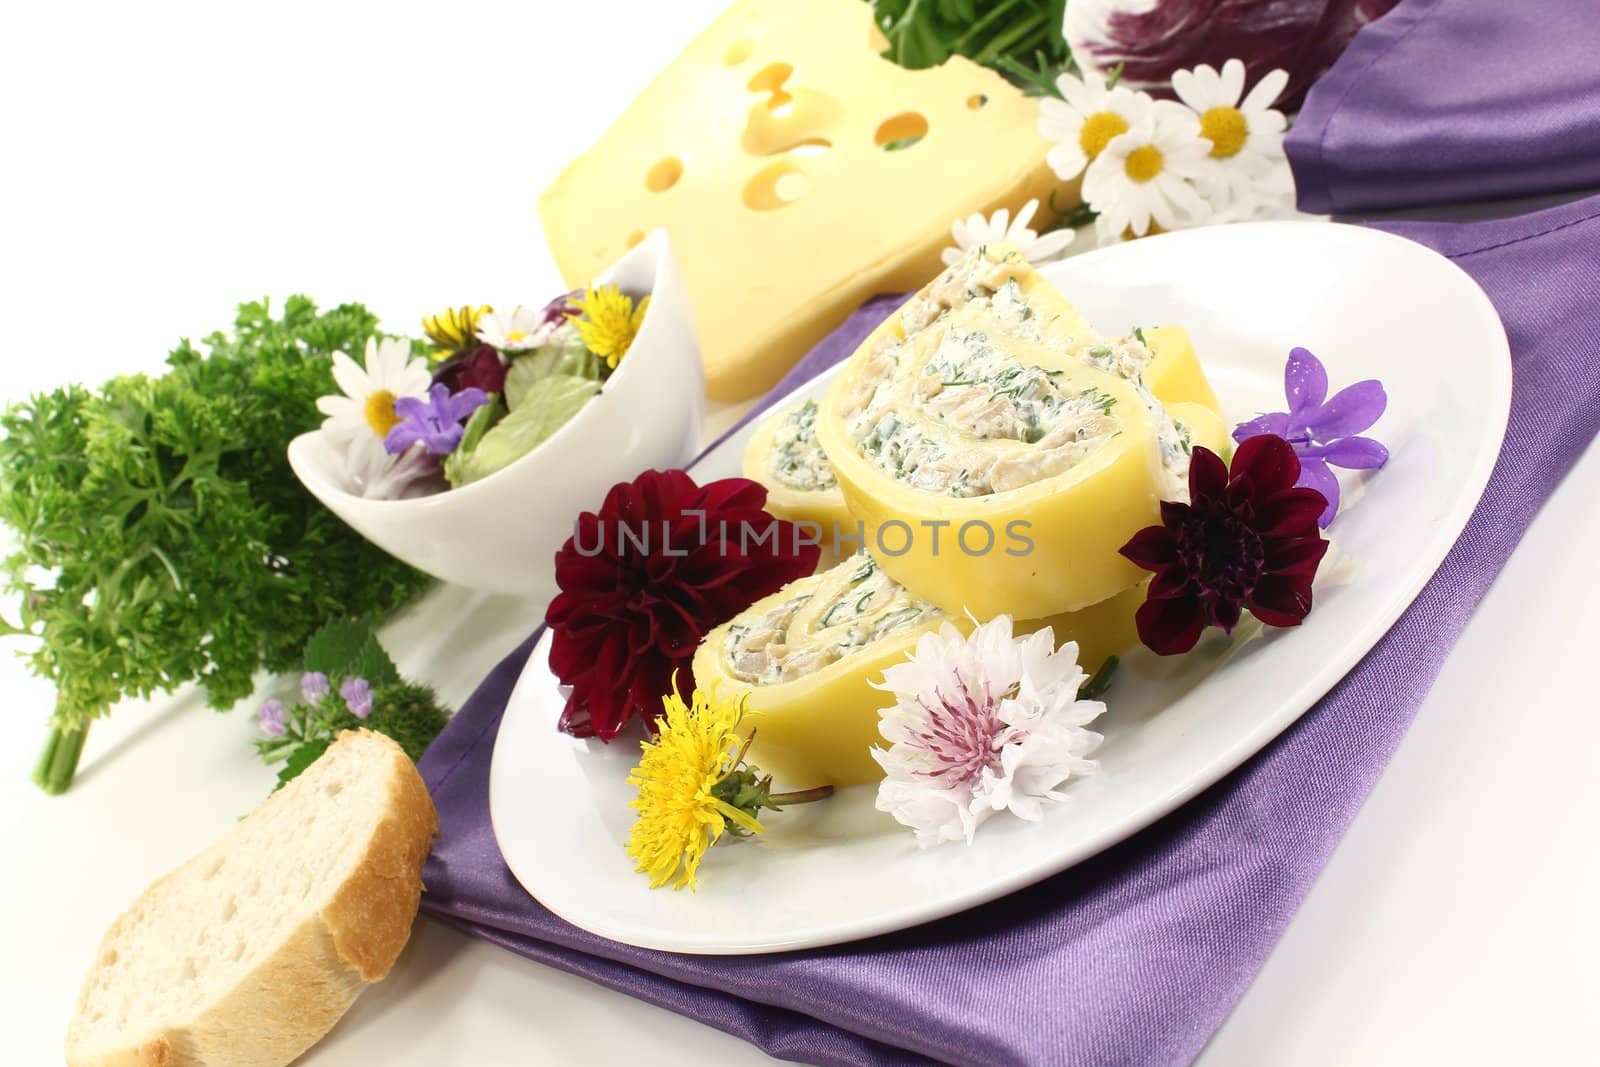 fresh stuffed cheese rolls with cream cheese and herbs on a light background